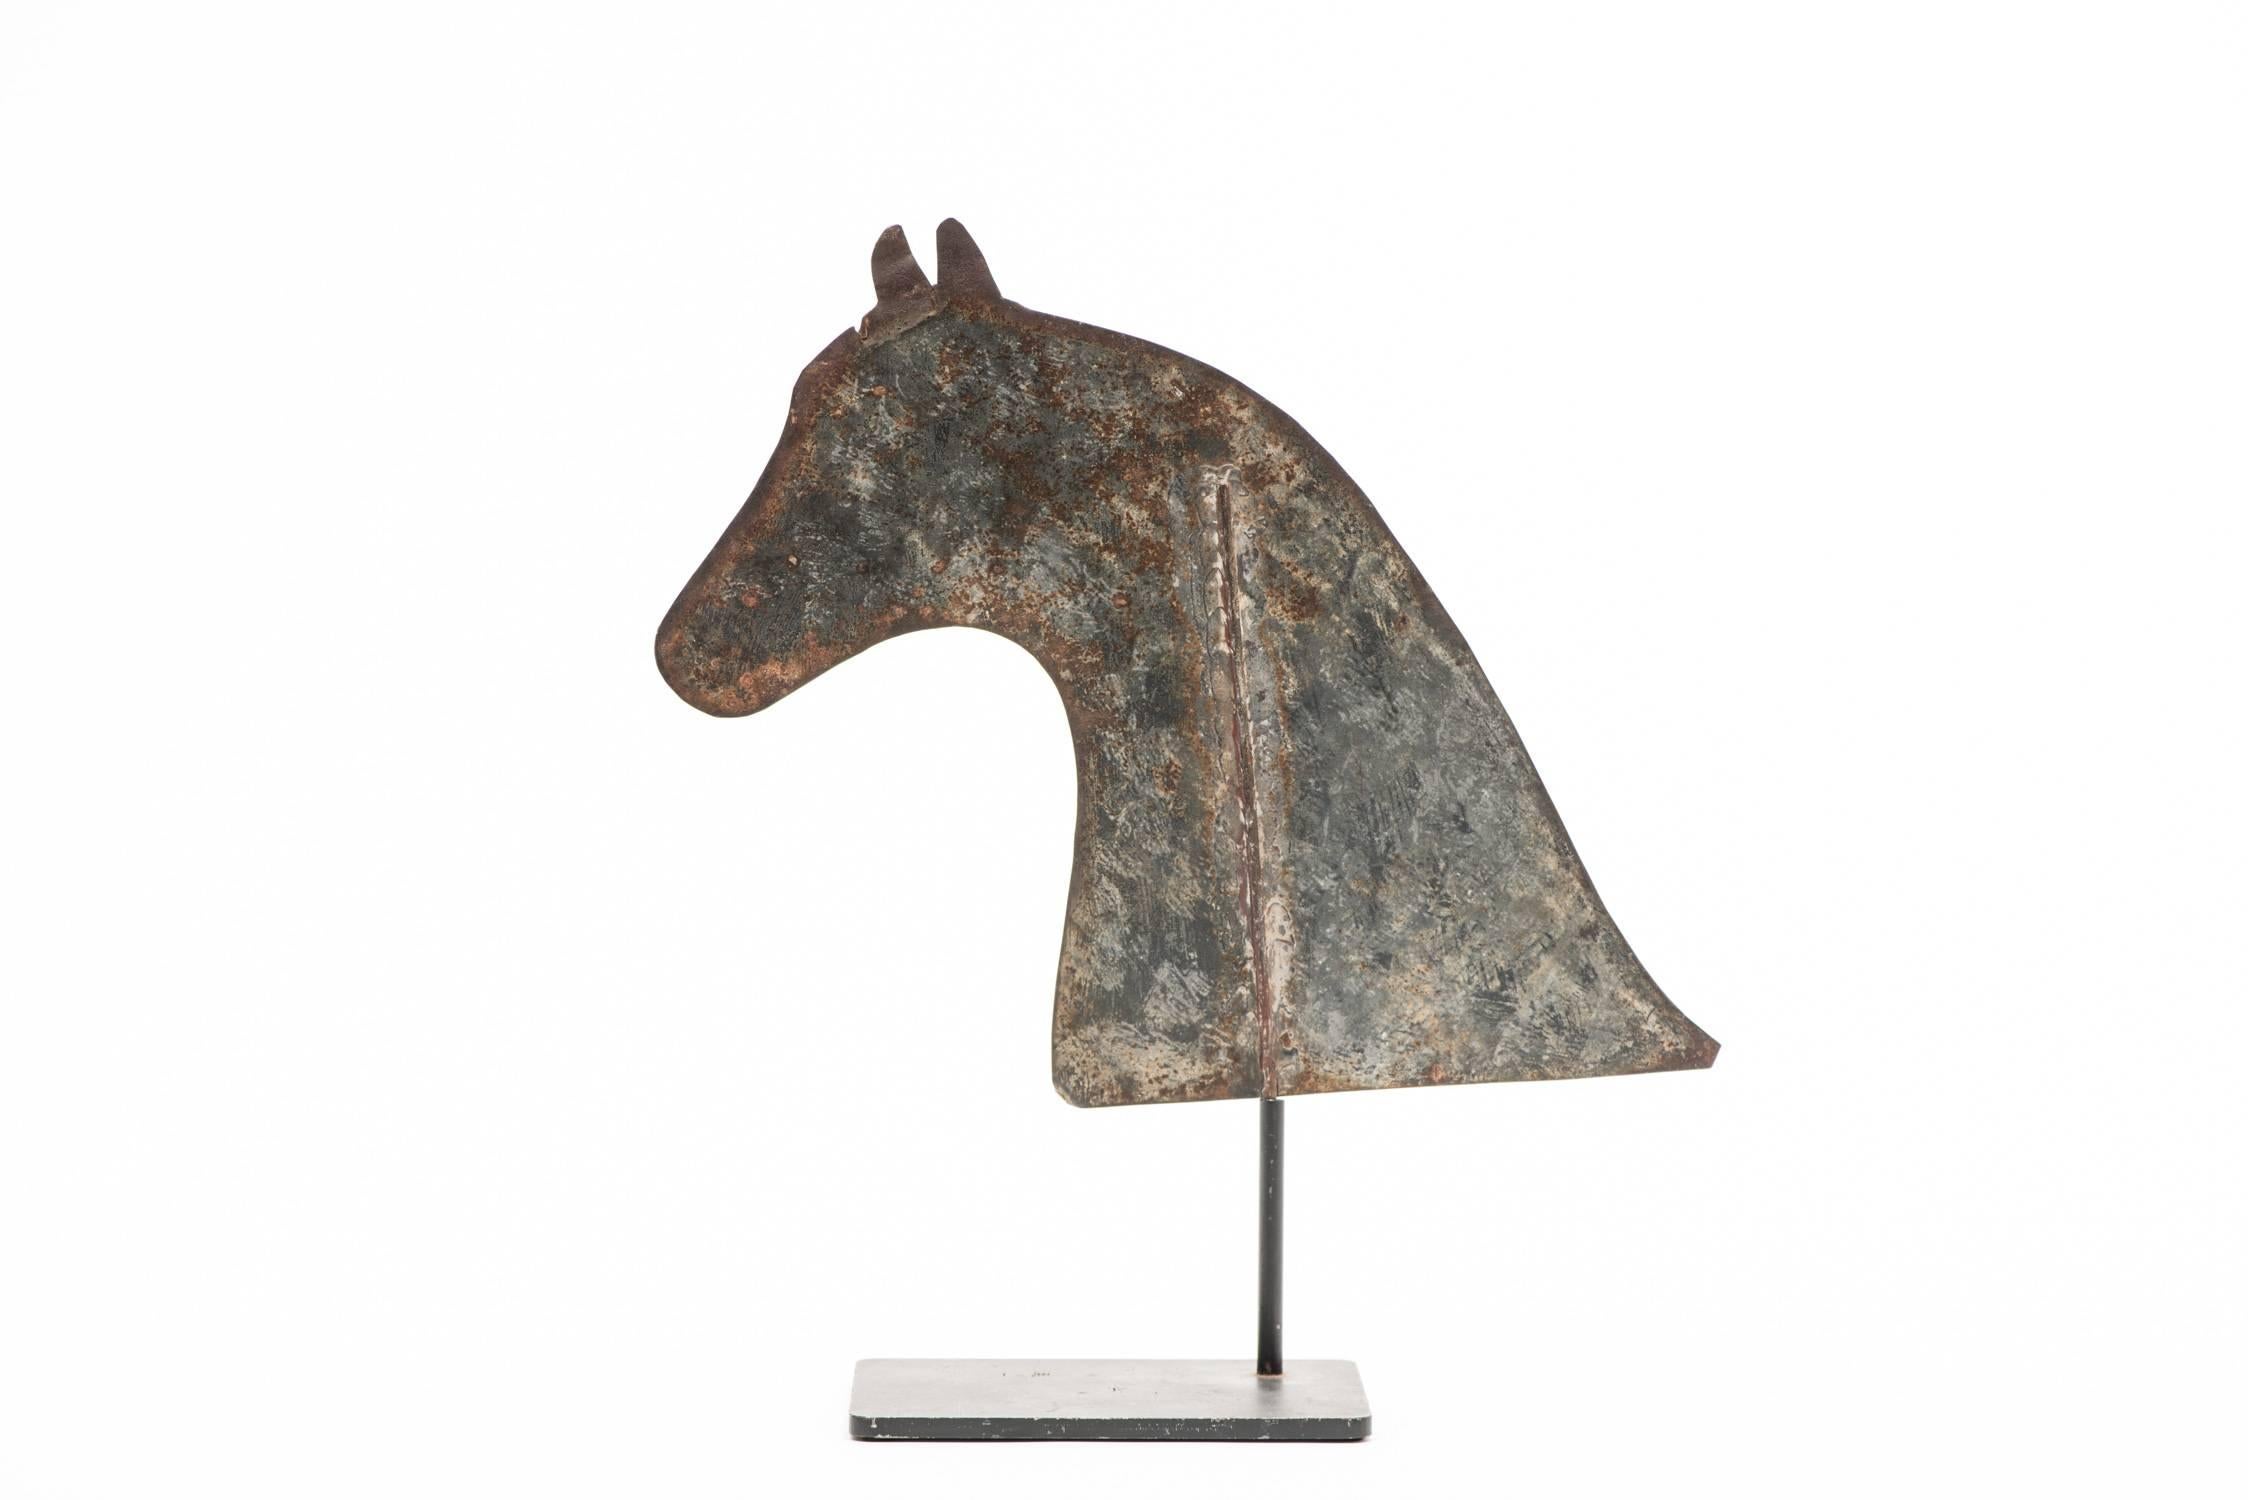 Horse weathervane.

Region: Northeast, 

circa late 19th century.

Materials: Tin, iron post, solder.

Dimensions: H 11” x W 12”.

Condition: Overall good. Weathered surface, oxidation, minor cracks to horse’s ears. No restoration. 
